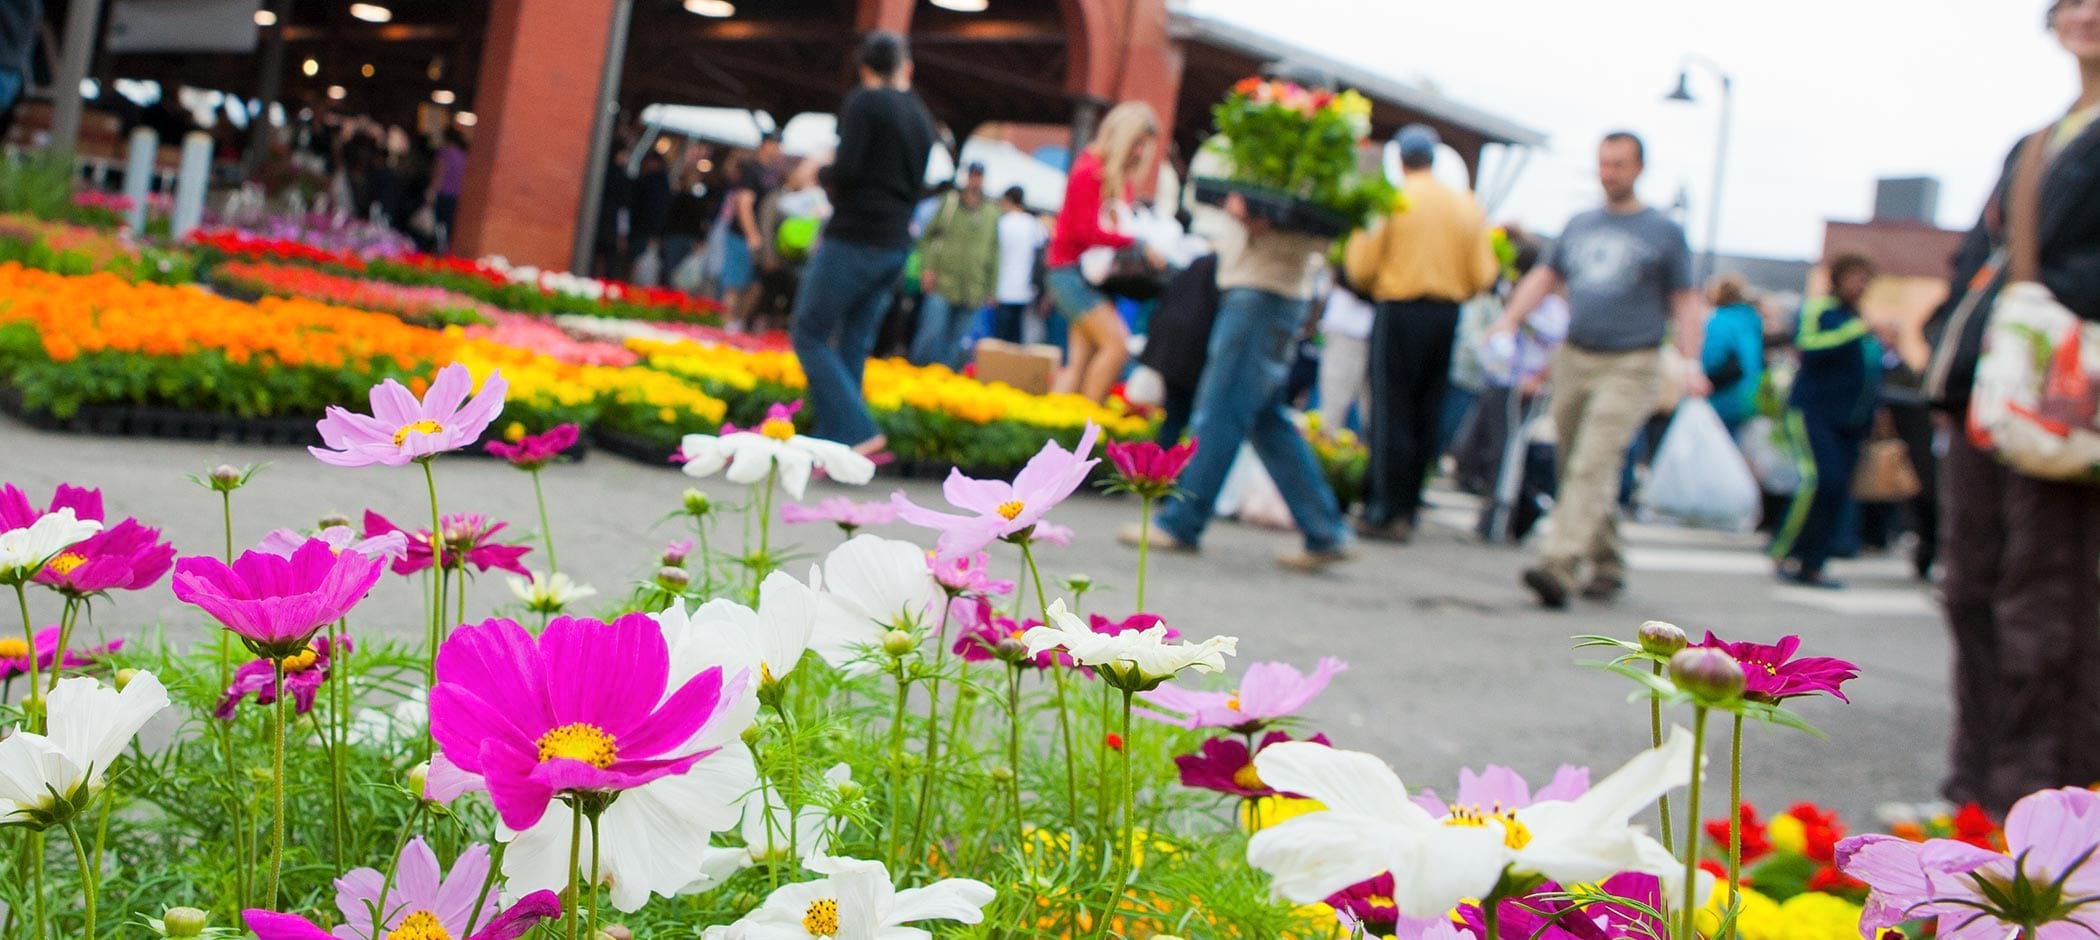 What Day Is Flower At Eastern Market Best Flower Site